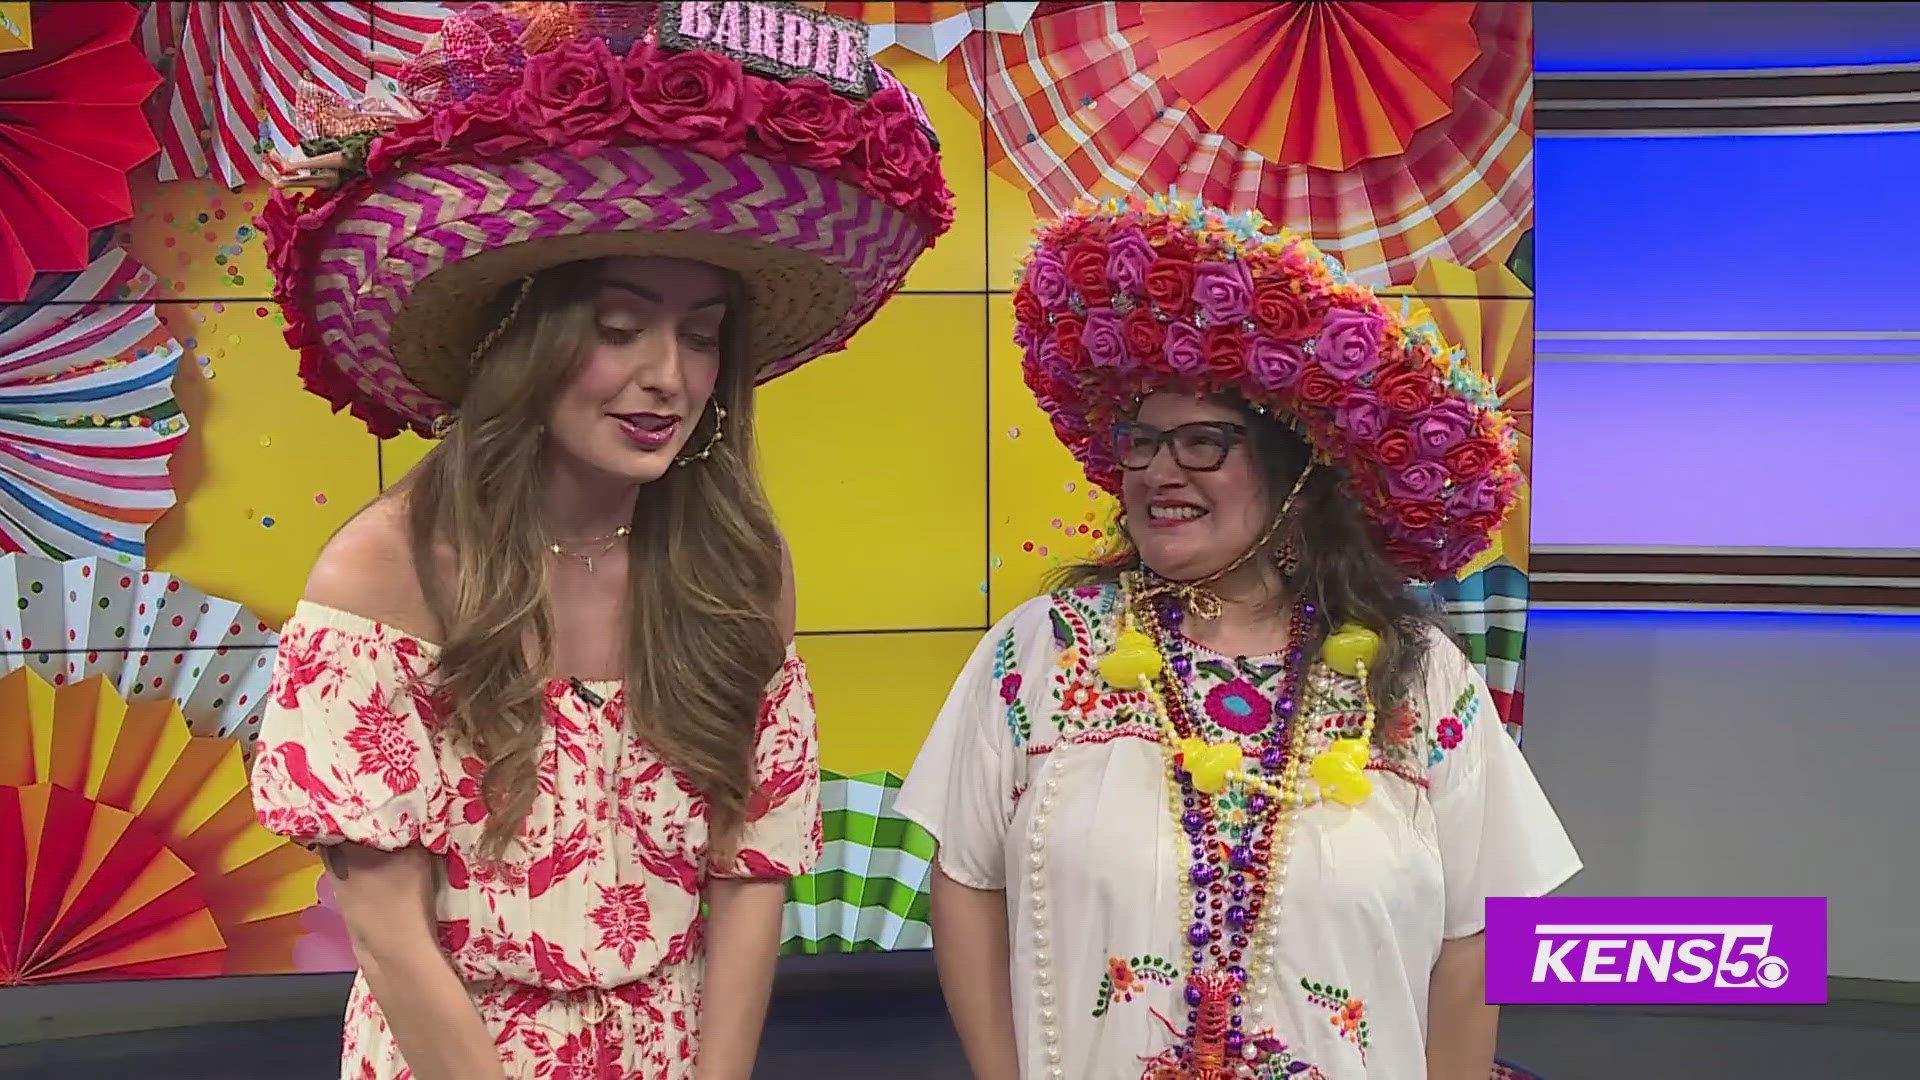 Patricia Garcia Duarte with Patty's Creations shares her fun & festive Fiesta hats.